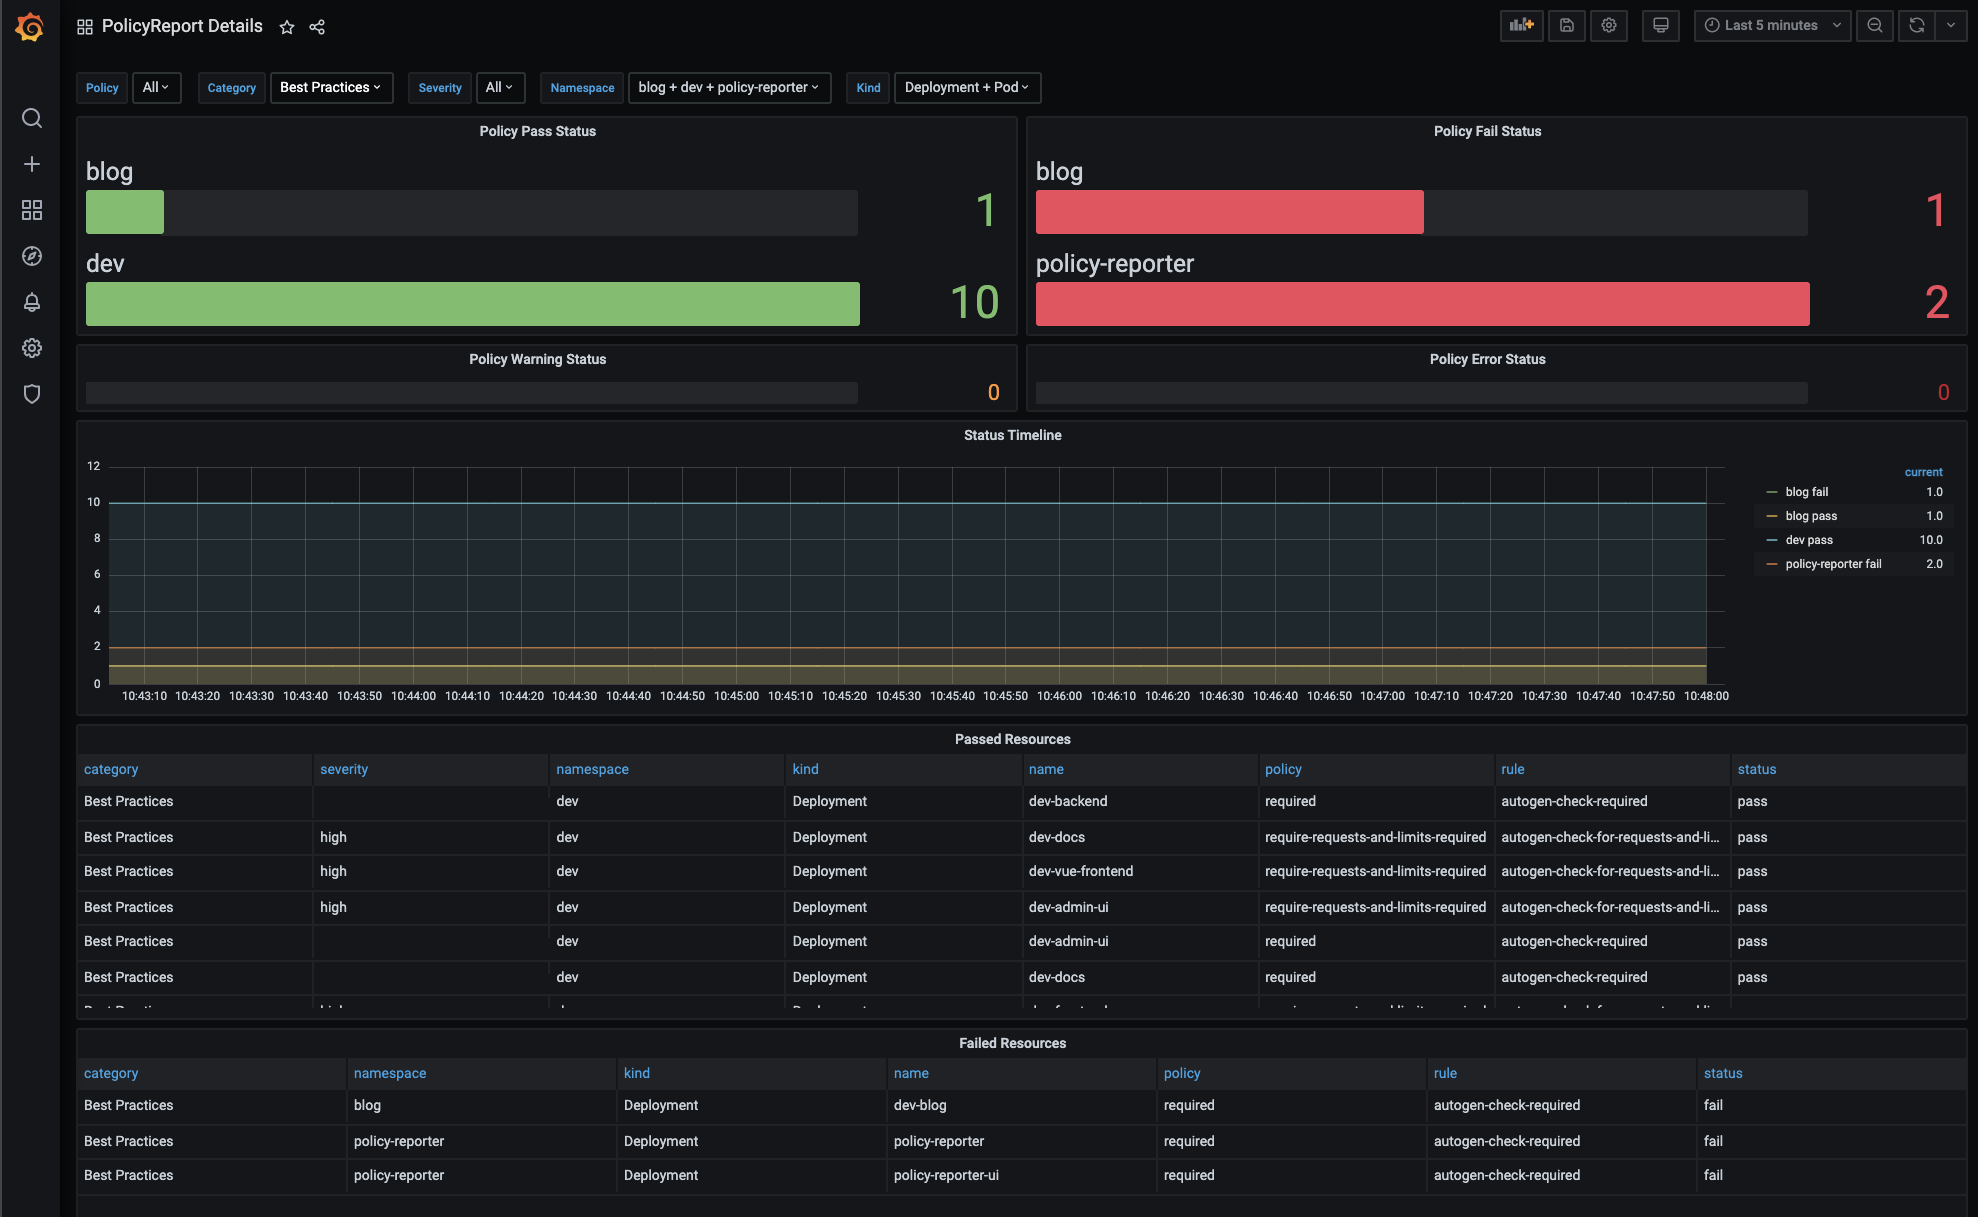 Grafana: Policy Report Details